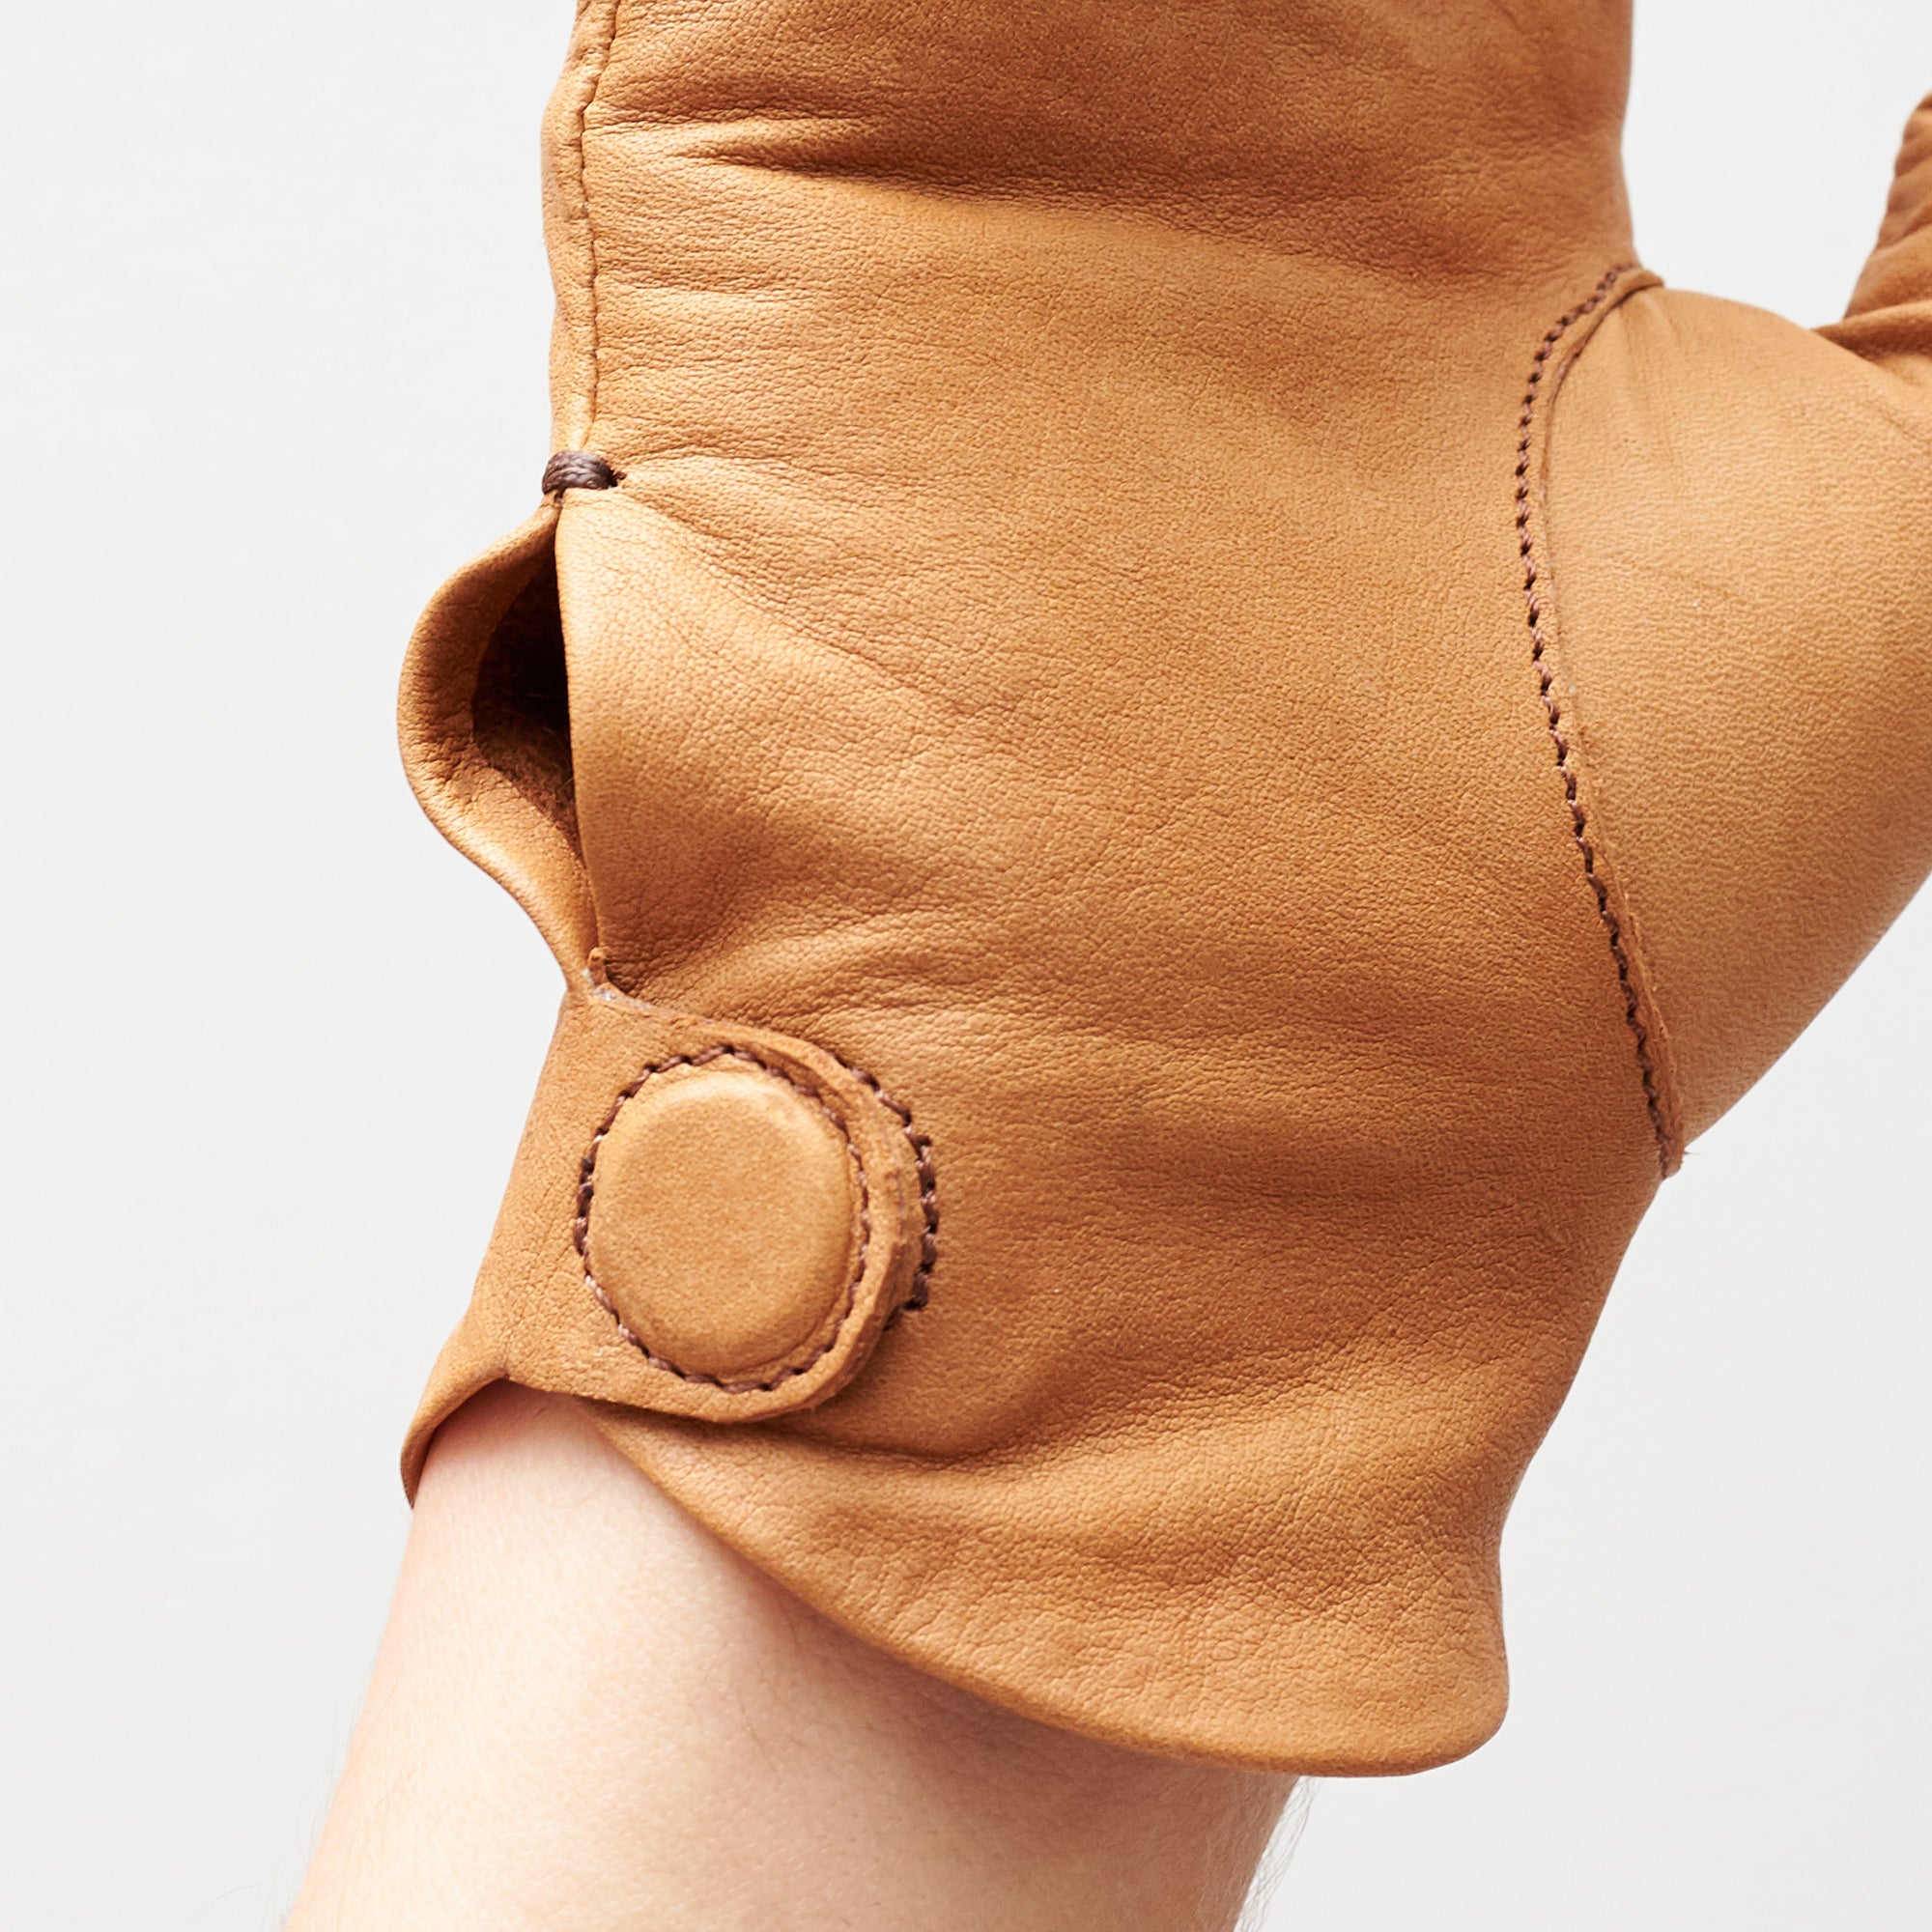 Magnetic closure. Mens leather gloves by Capra